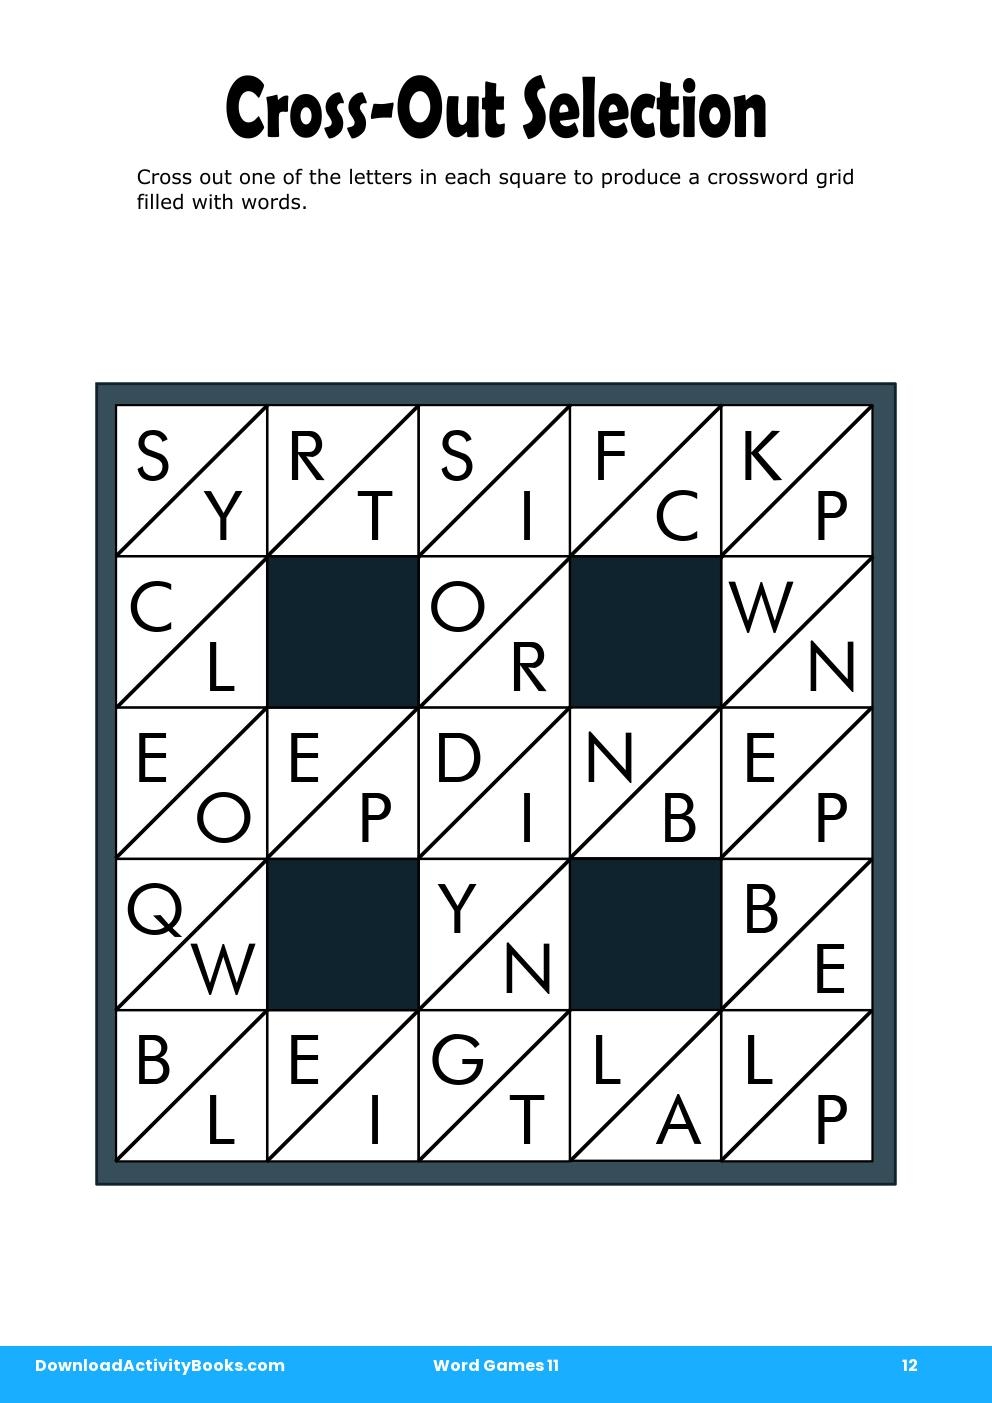 Cross-Out Selection in Word Games 11